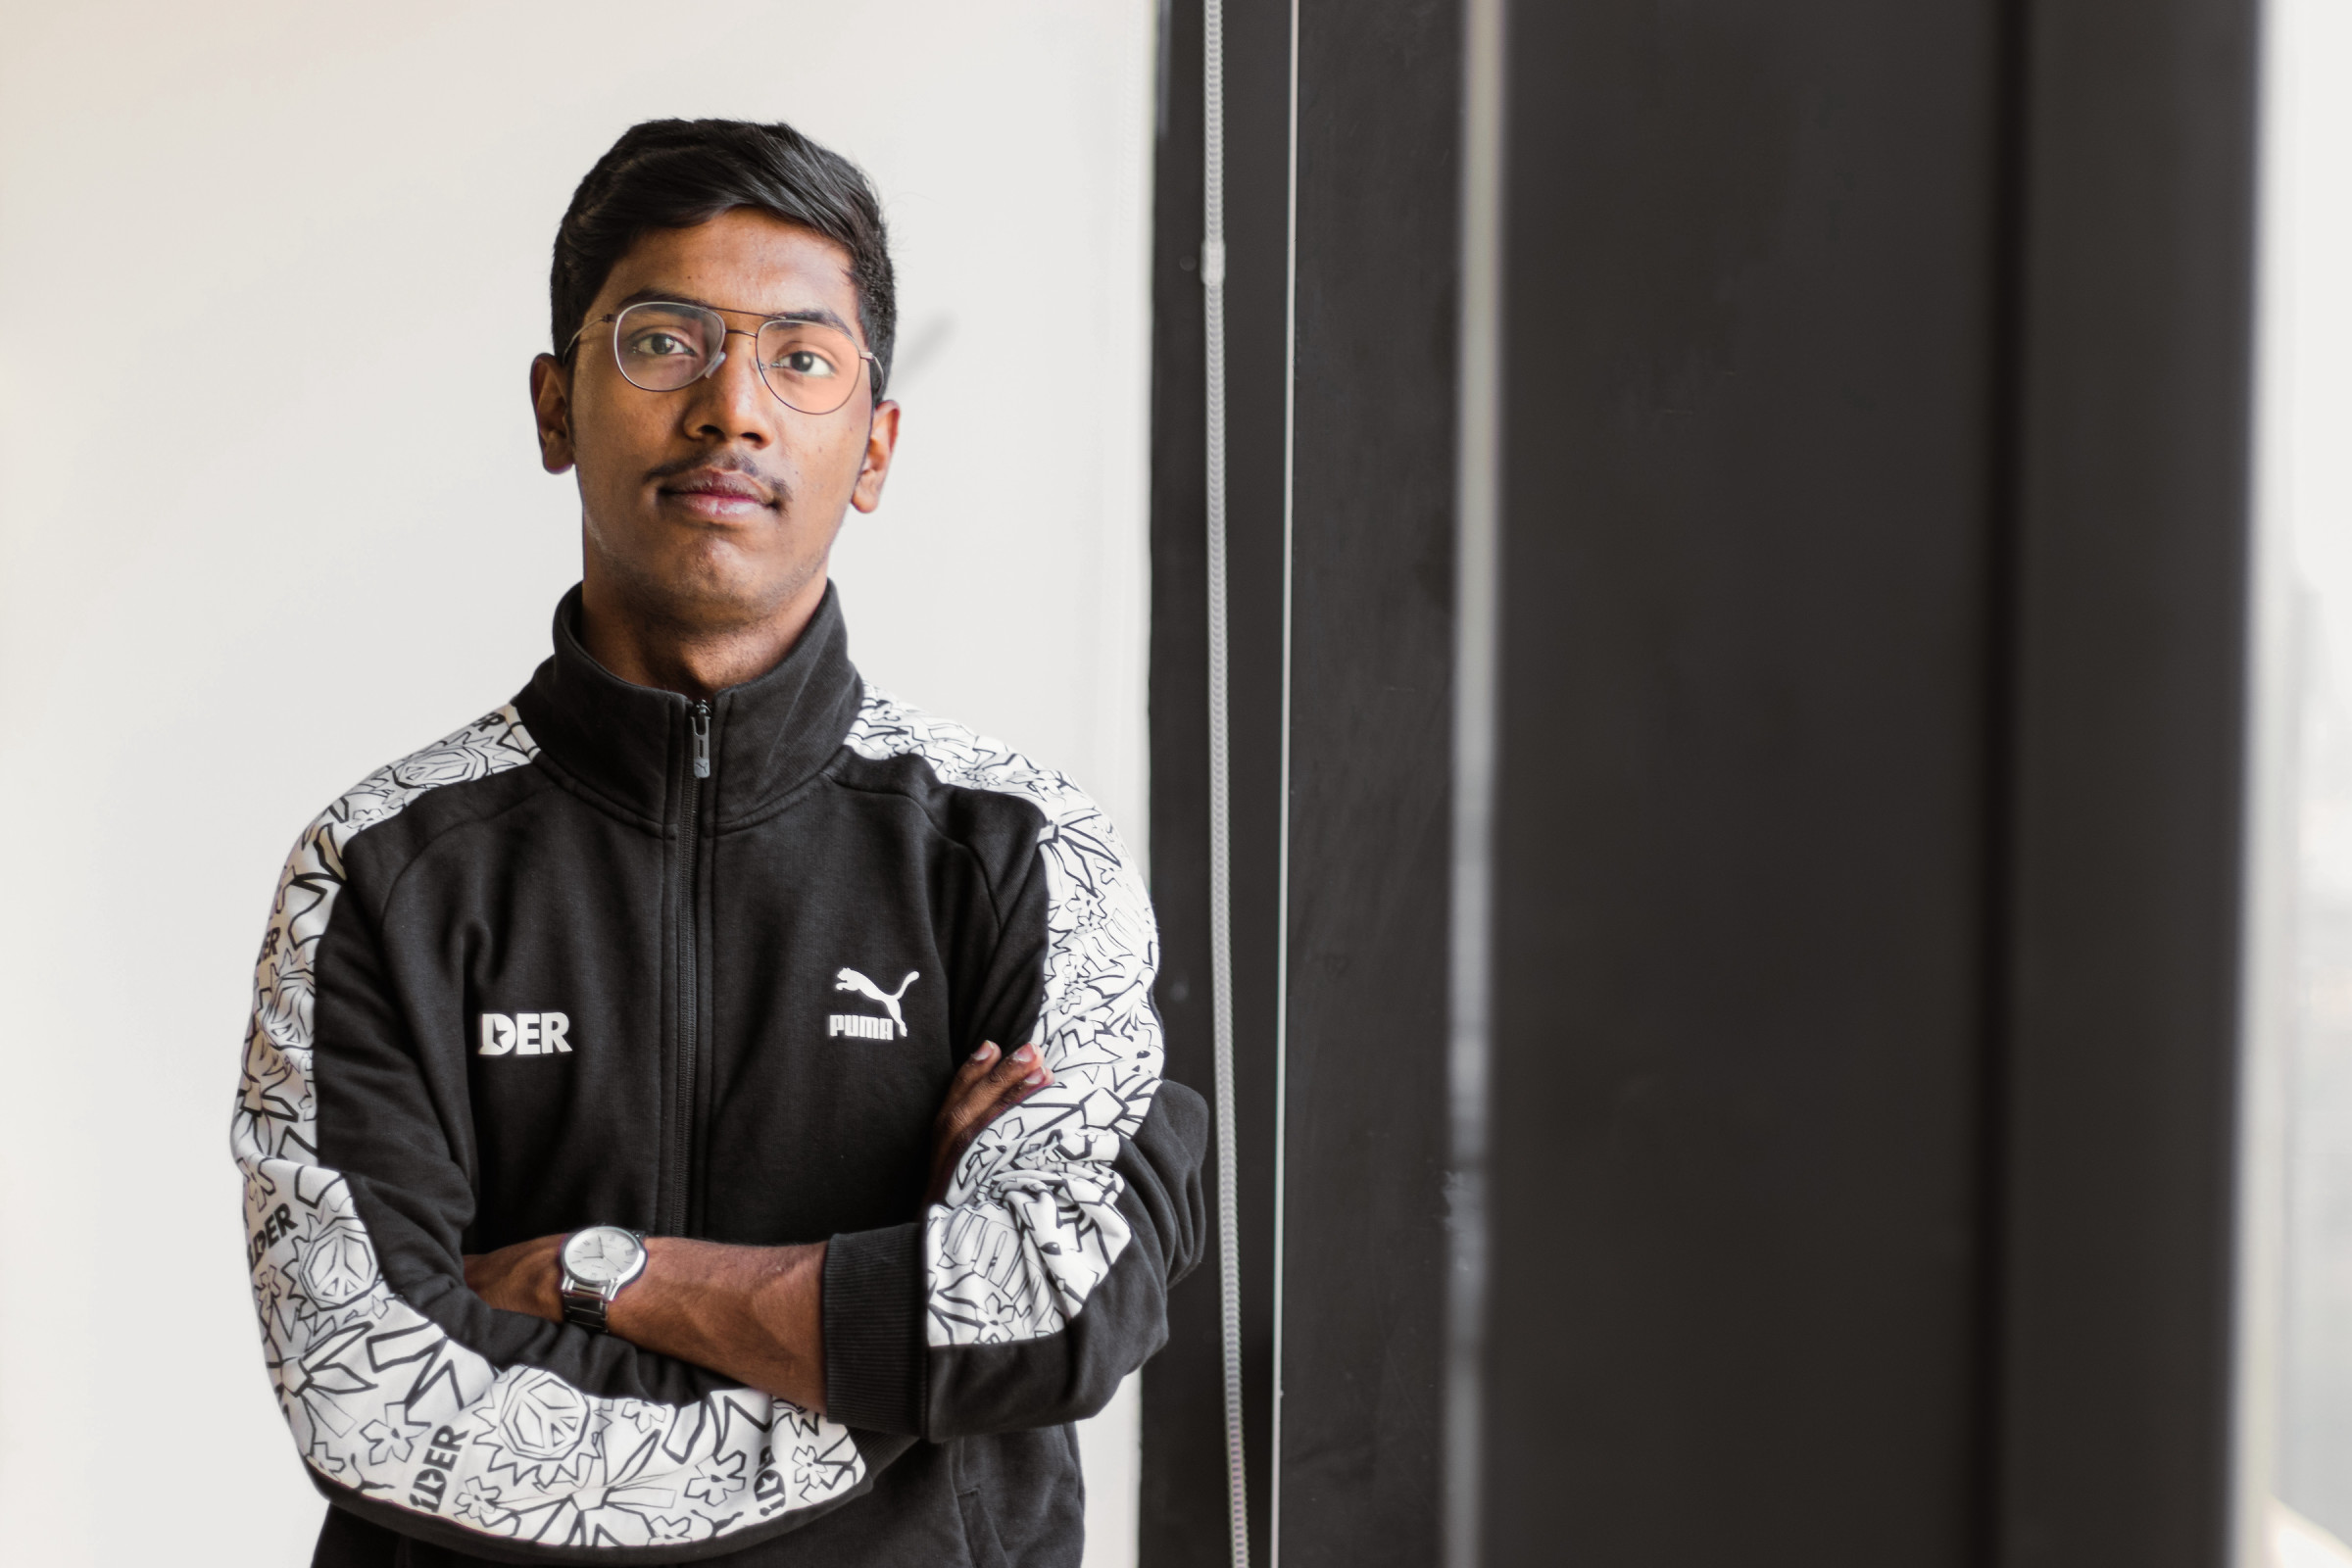 Author Rohan in a black-and-white Puma jacket against a white-and-black background, looking straight on at the camera